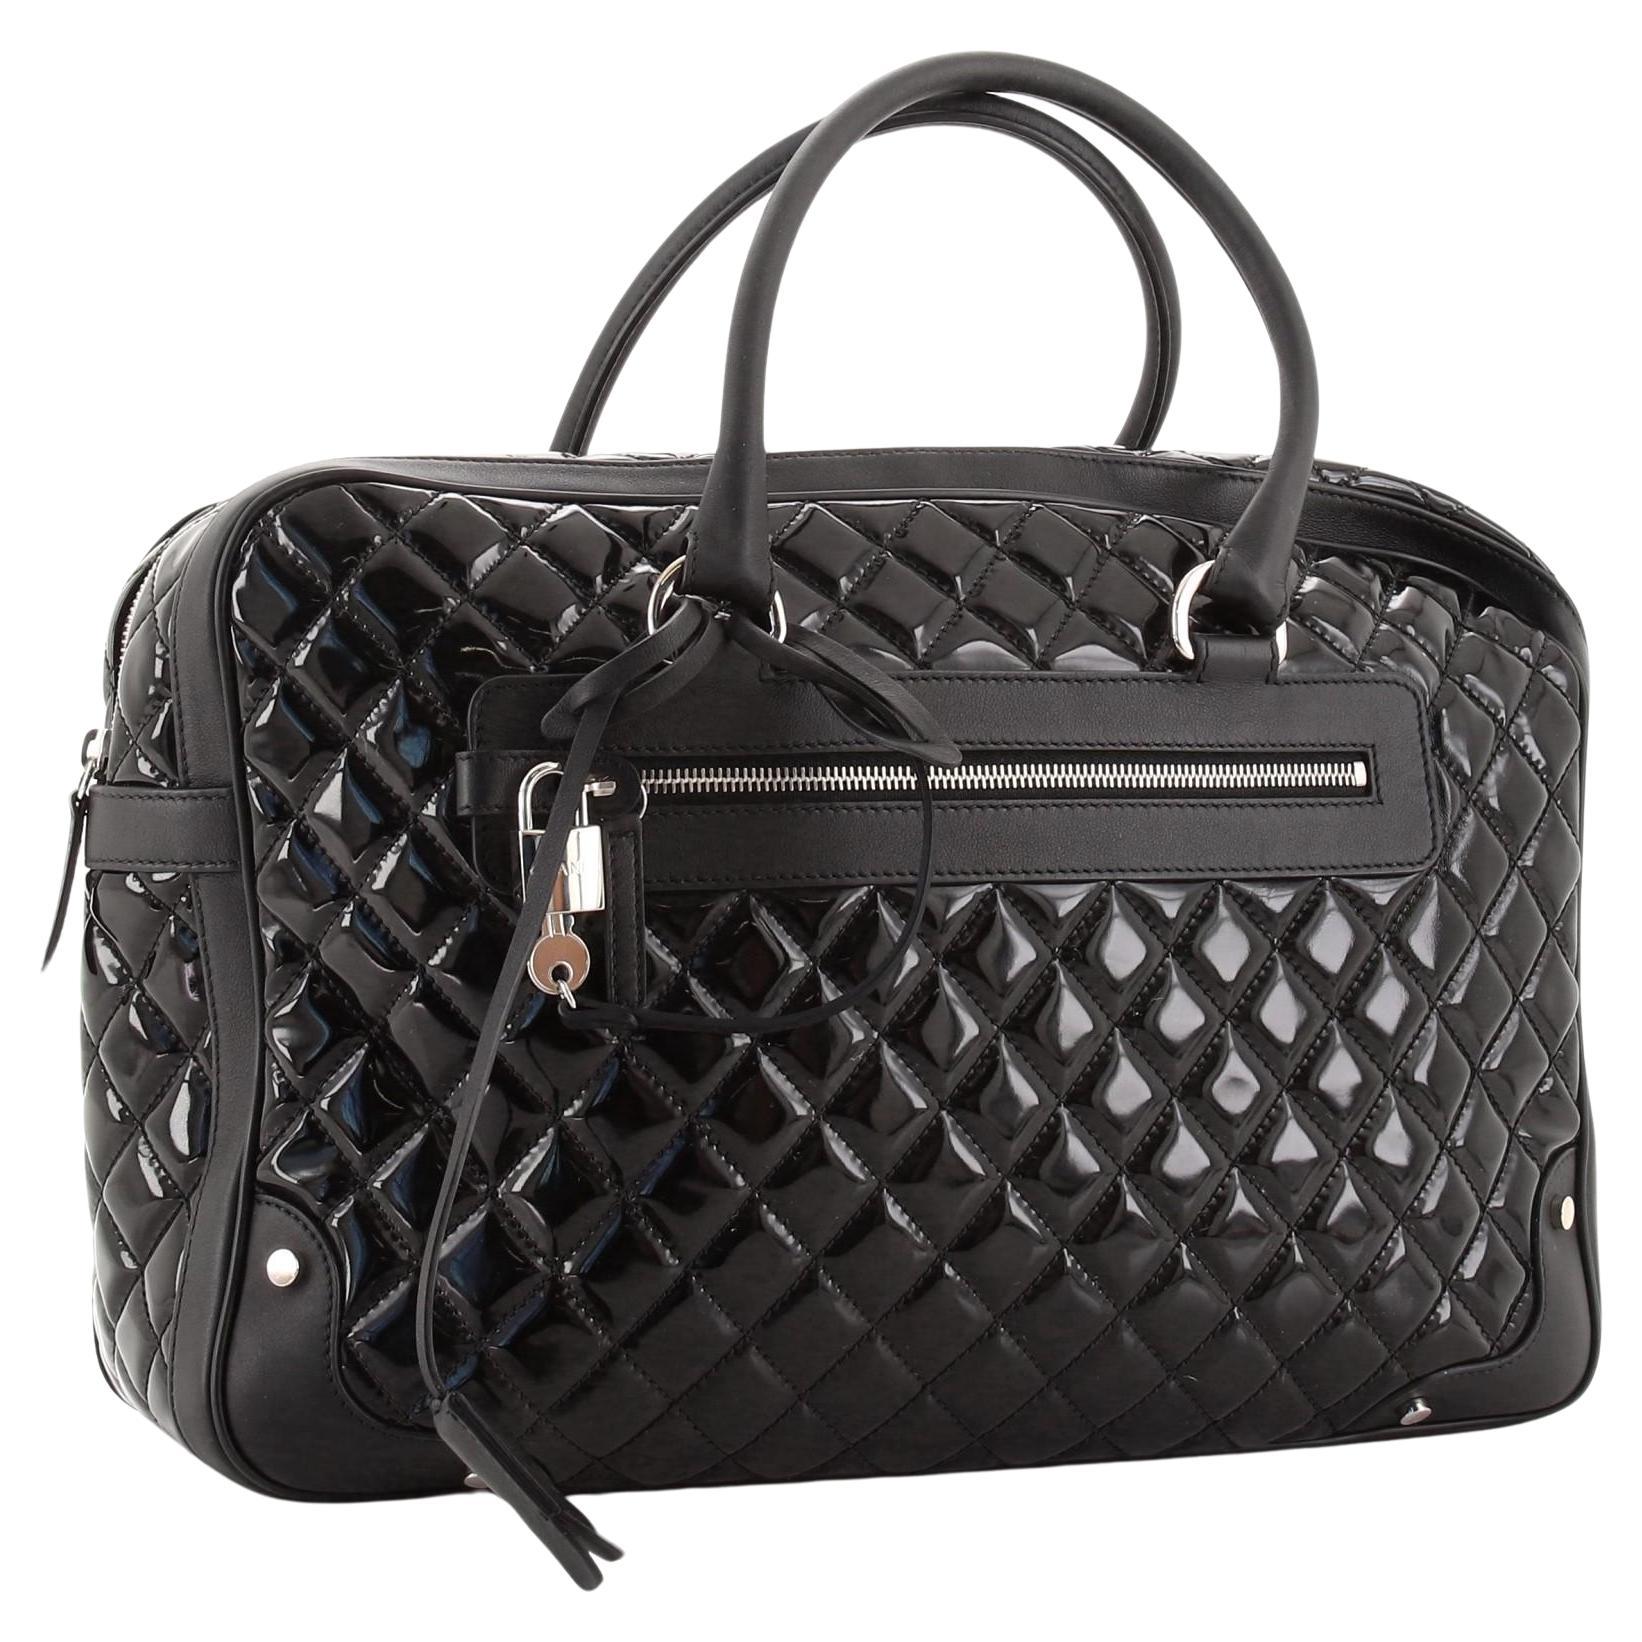 Chanel 2015 Timeless Quilted Carry-on Travel Tote Royal Black Patent Leather Bag For Sale